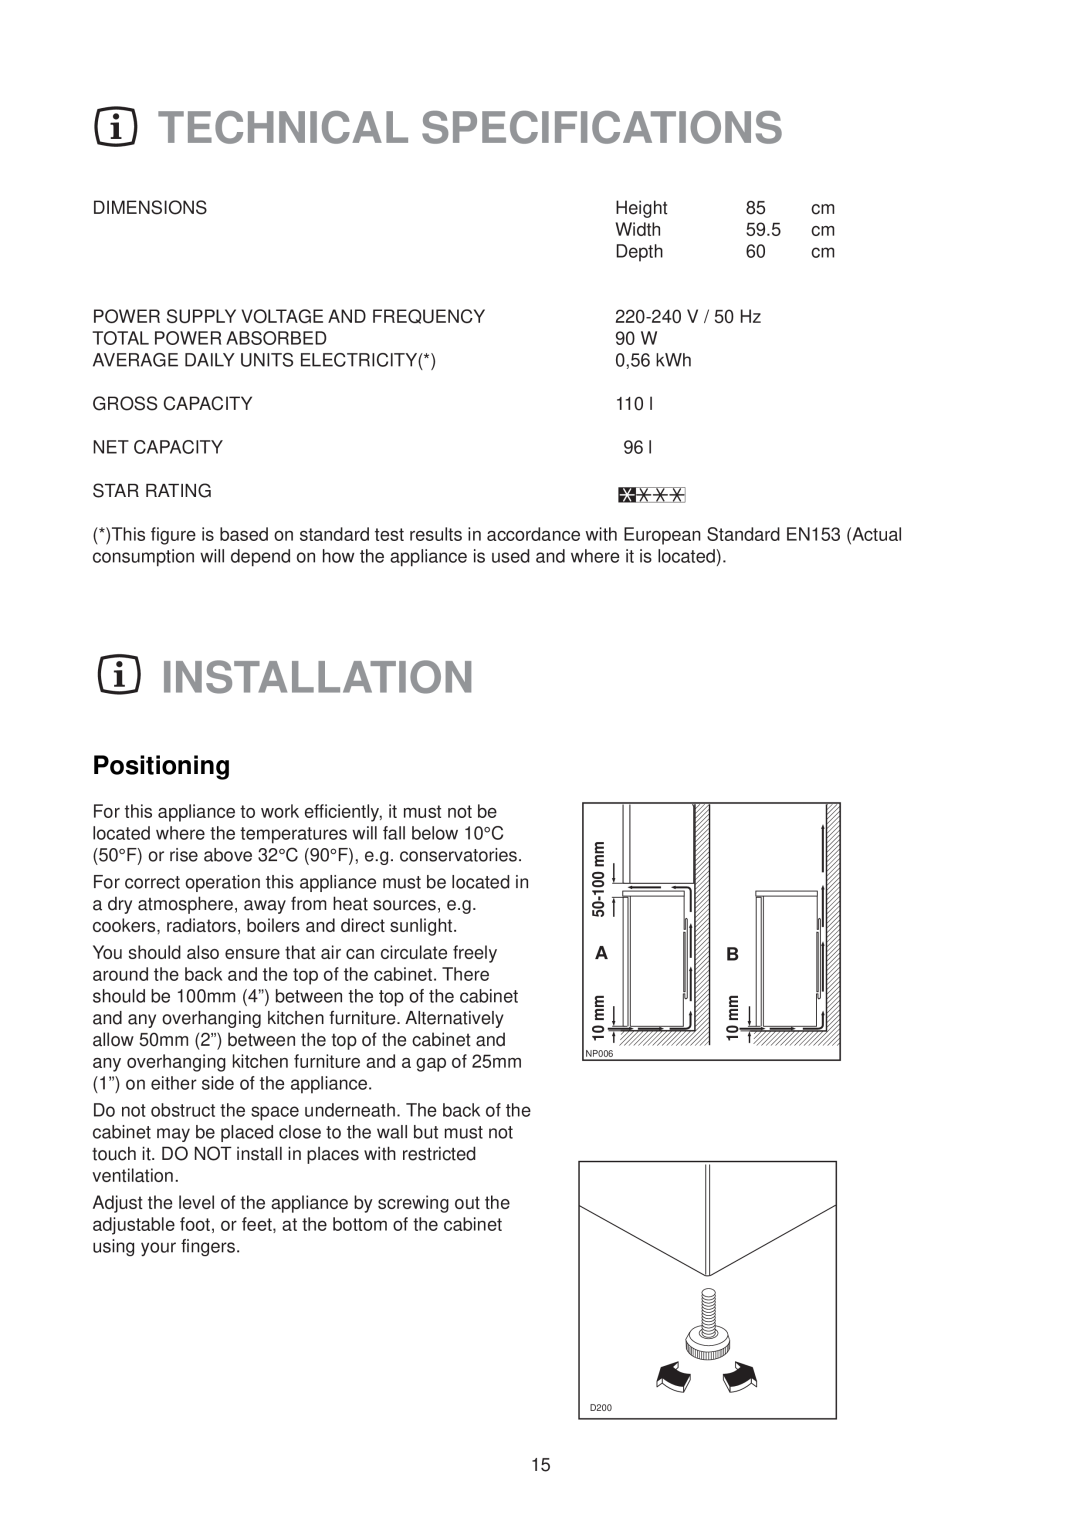 Zanussi ZVR 47 R manual Technical Specifications, Installation, Positioning 